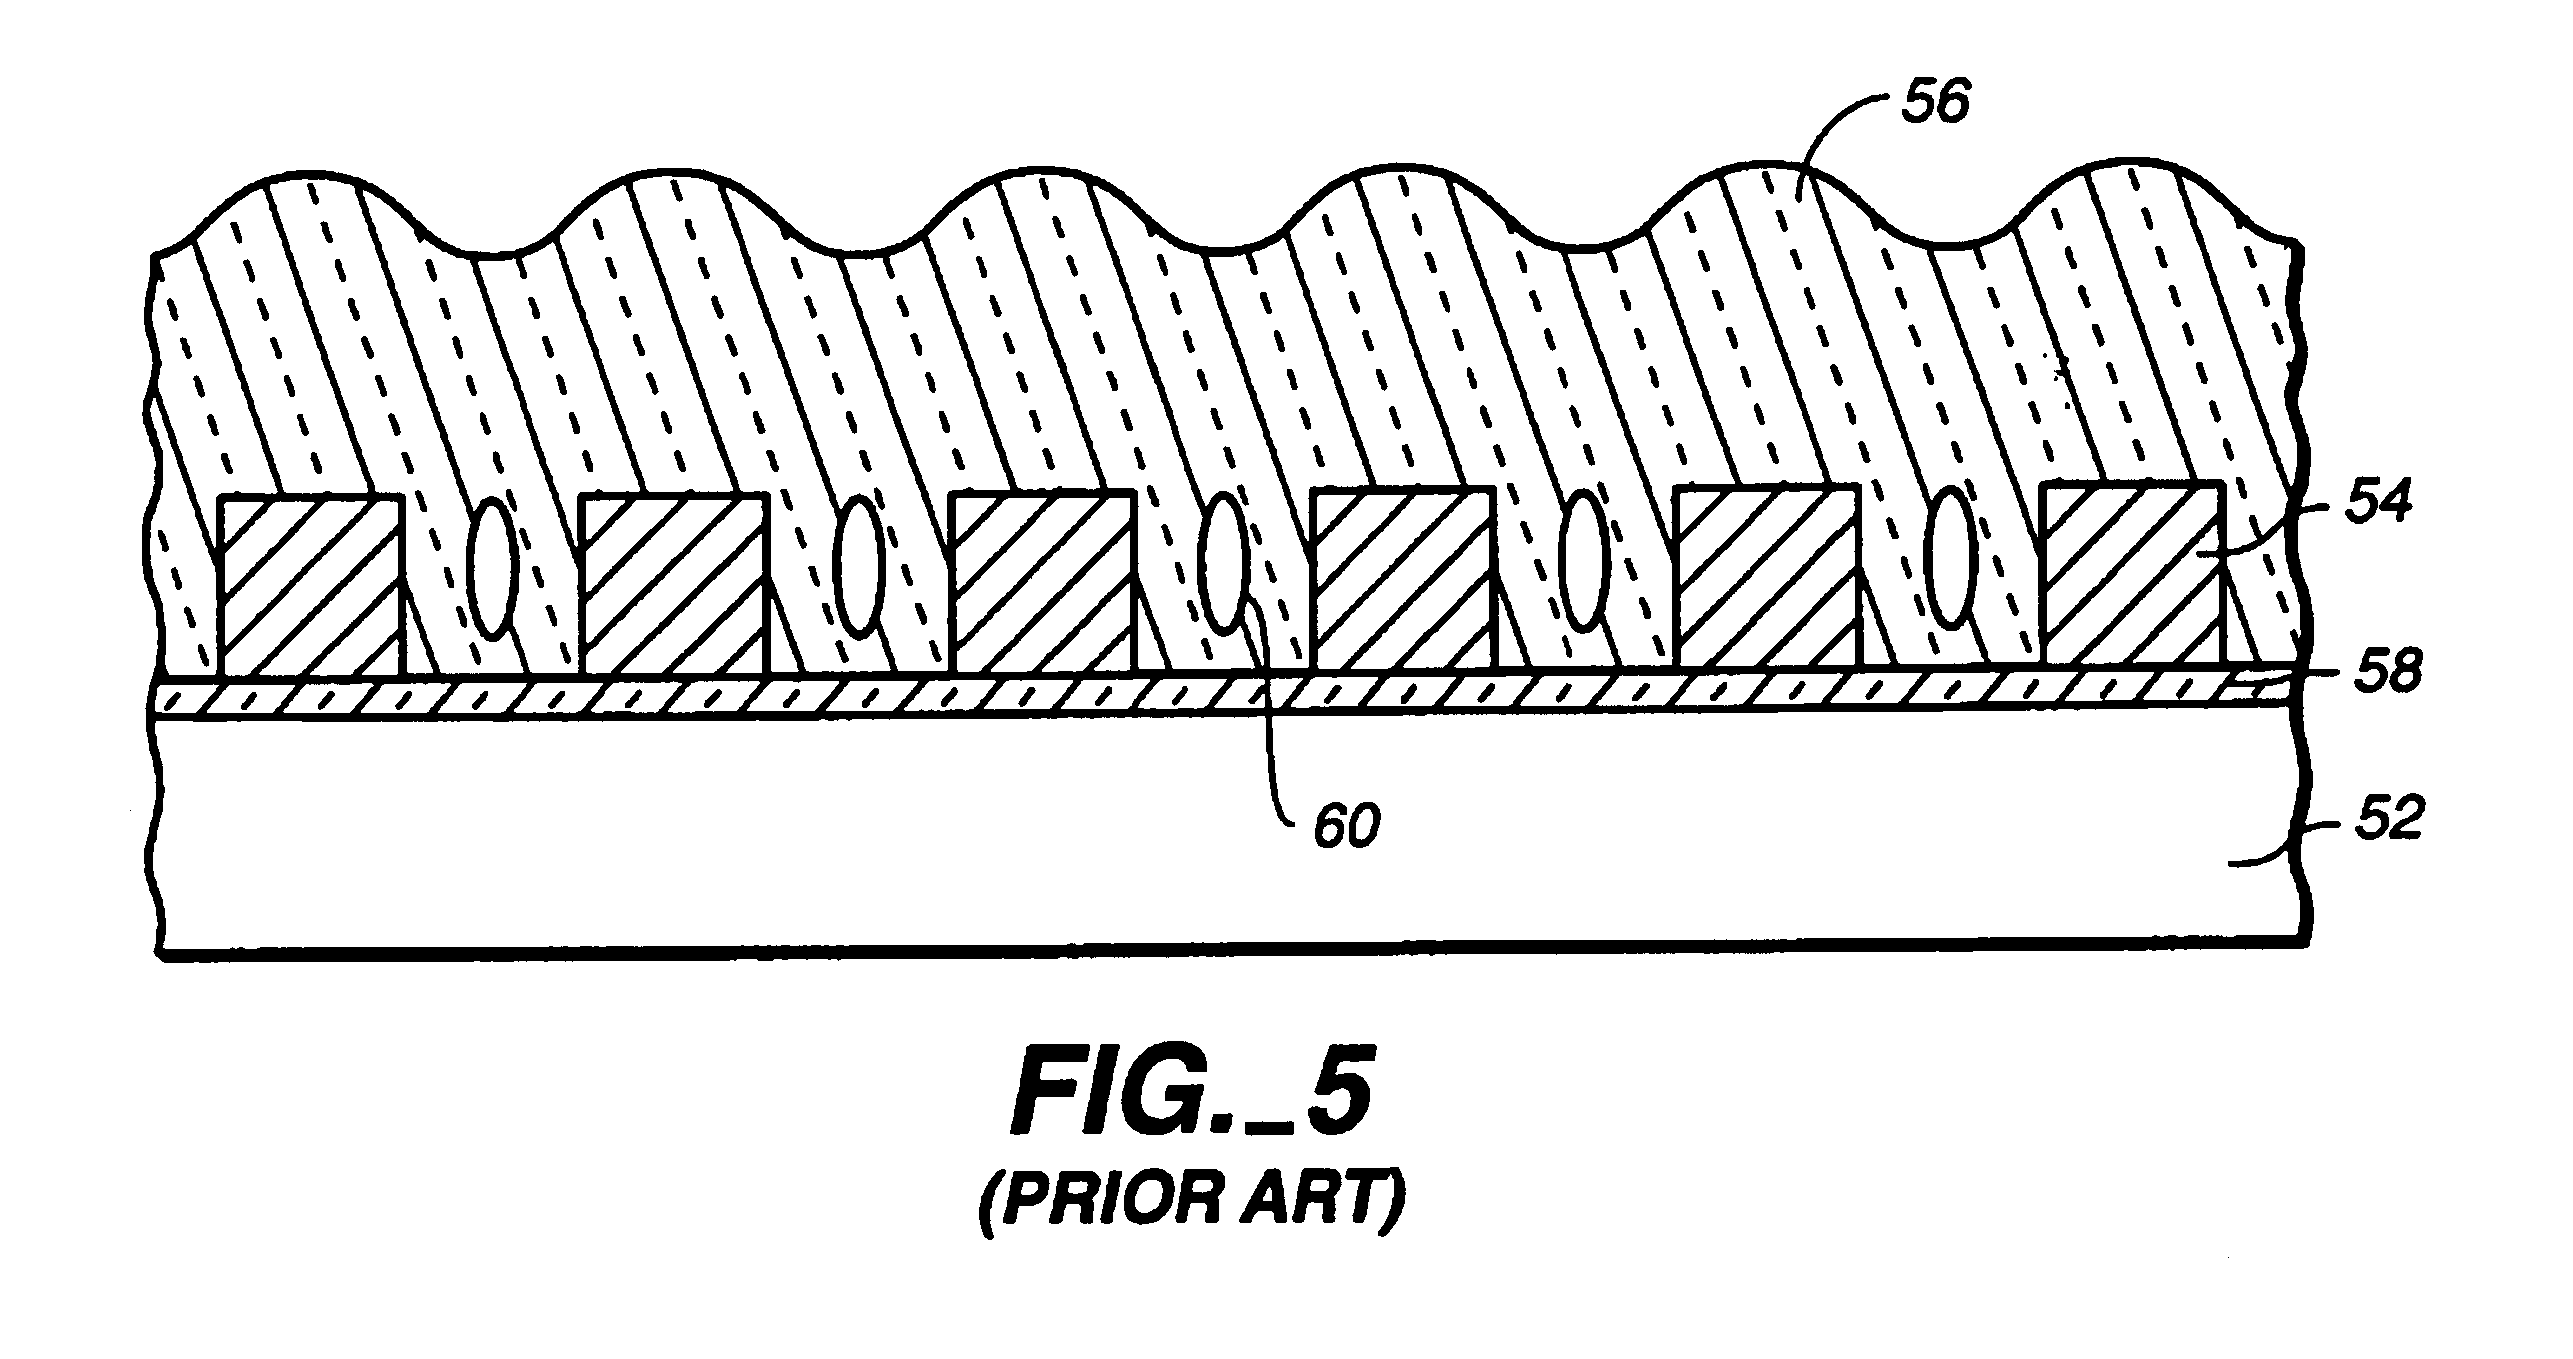 Method of forming pre-metal dielectric film on a semiconductor substrate including first layer of undoped oxide of high ozone:TEOS volume ratio and second layer of low ozone doped BPSG